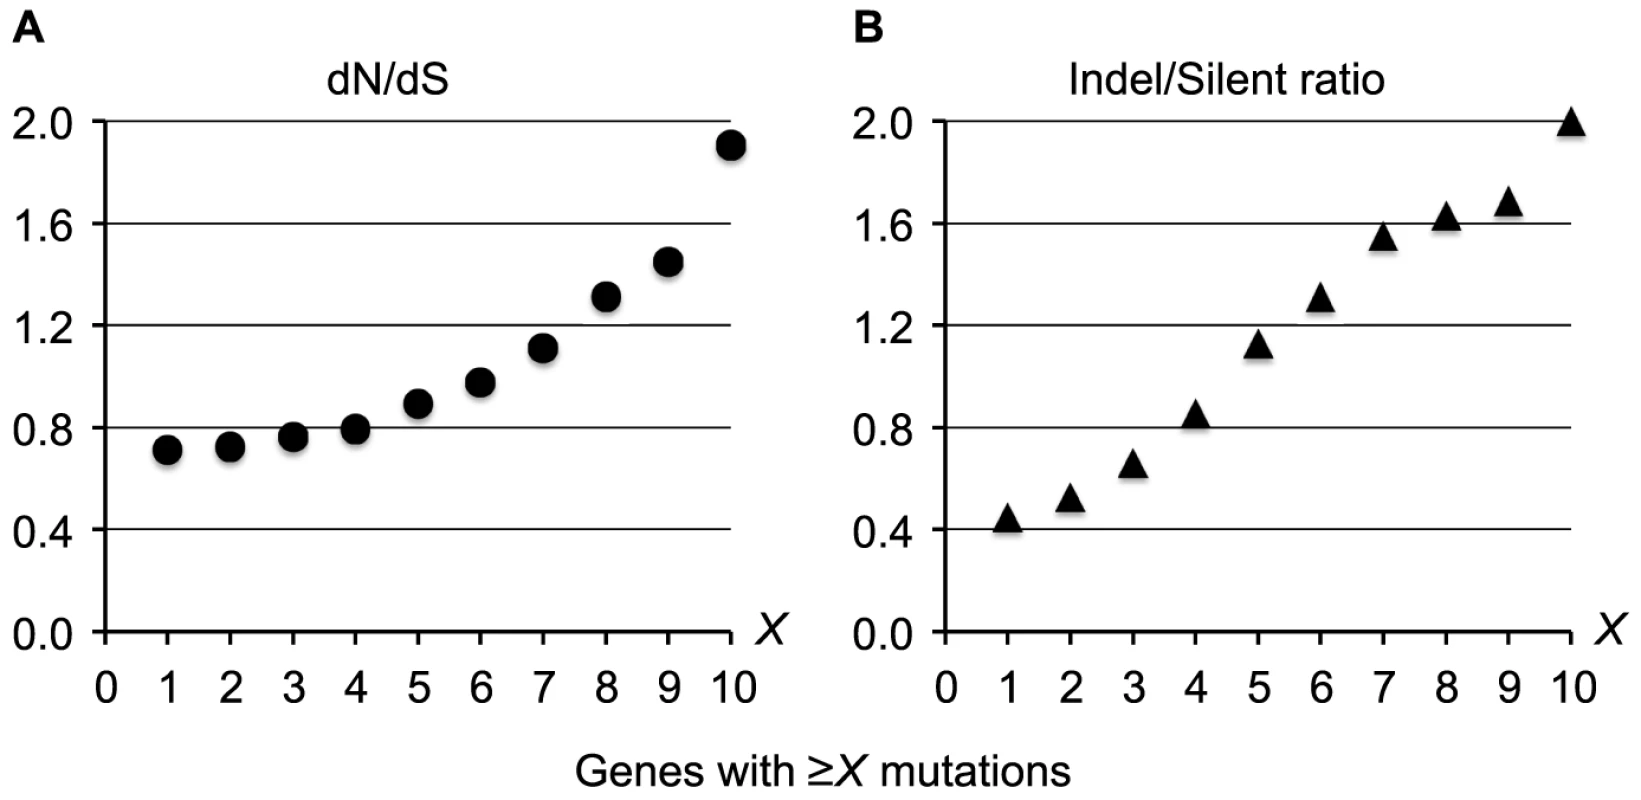 Increased pressures of selection for mutations in the top most mutated genes.